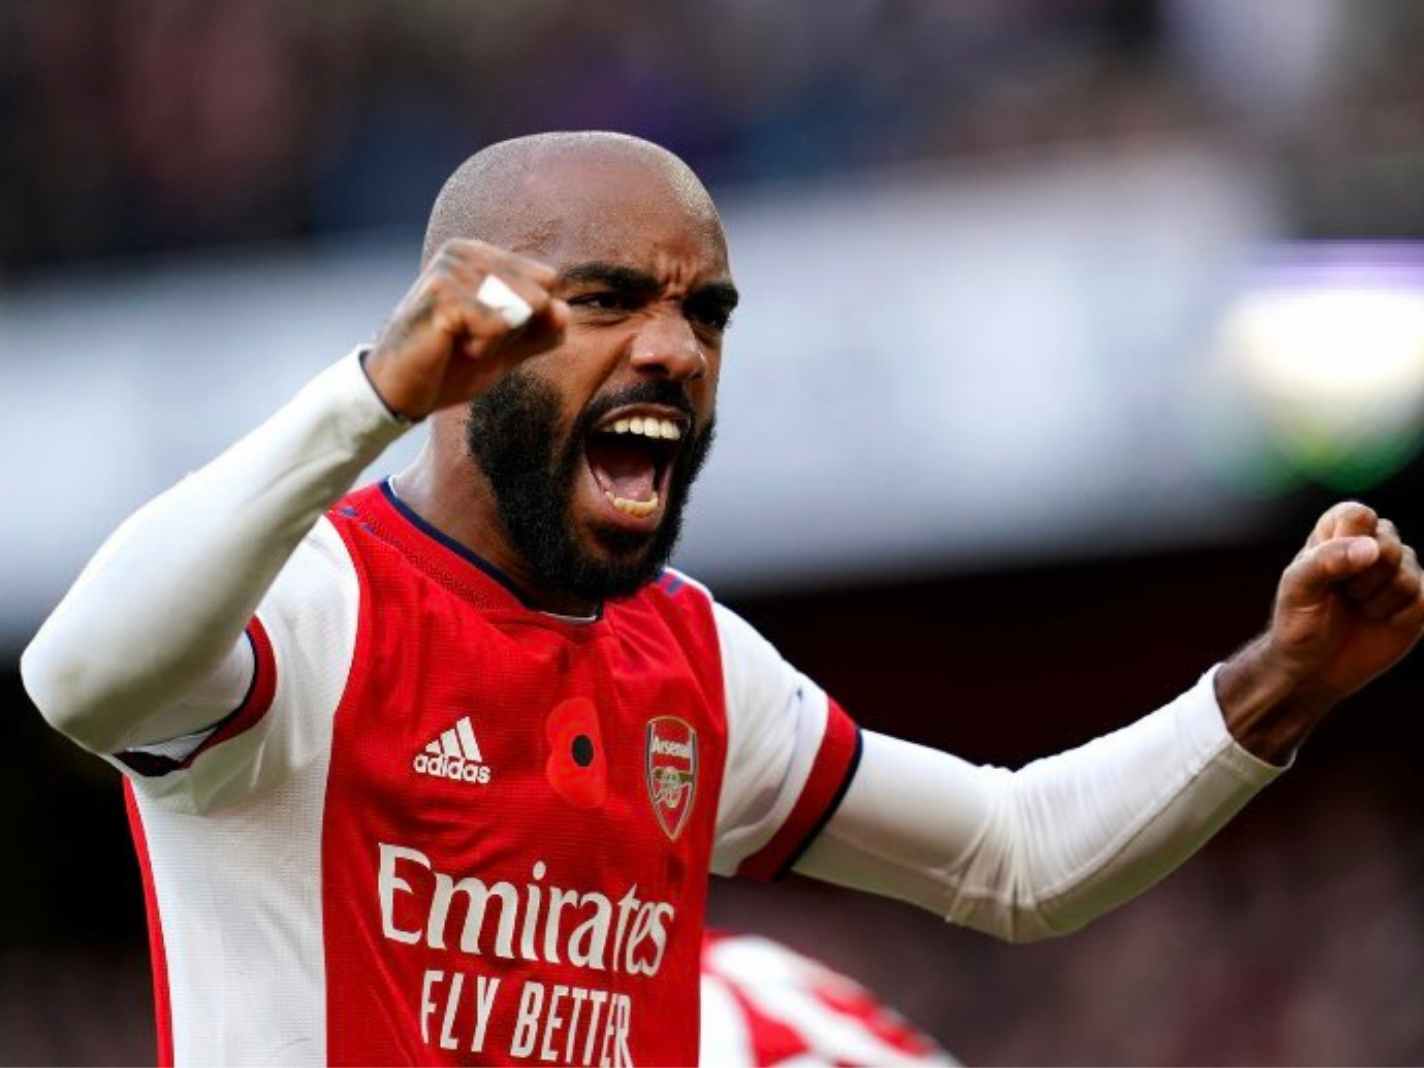 Lacazette has bald head rubbed by Ben White in oddest goal celebration ever